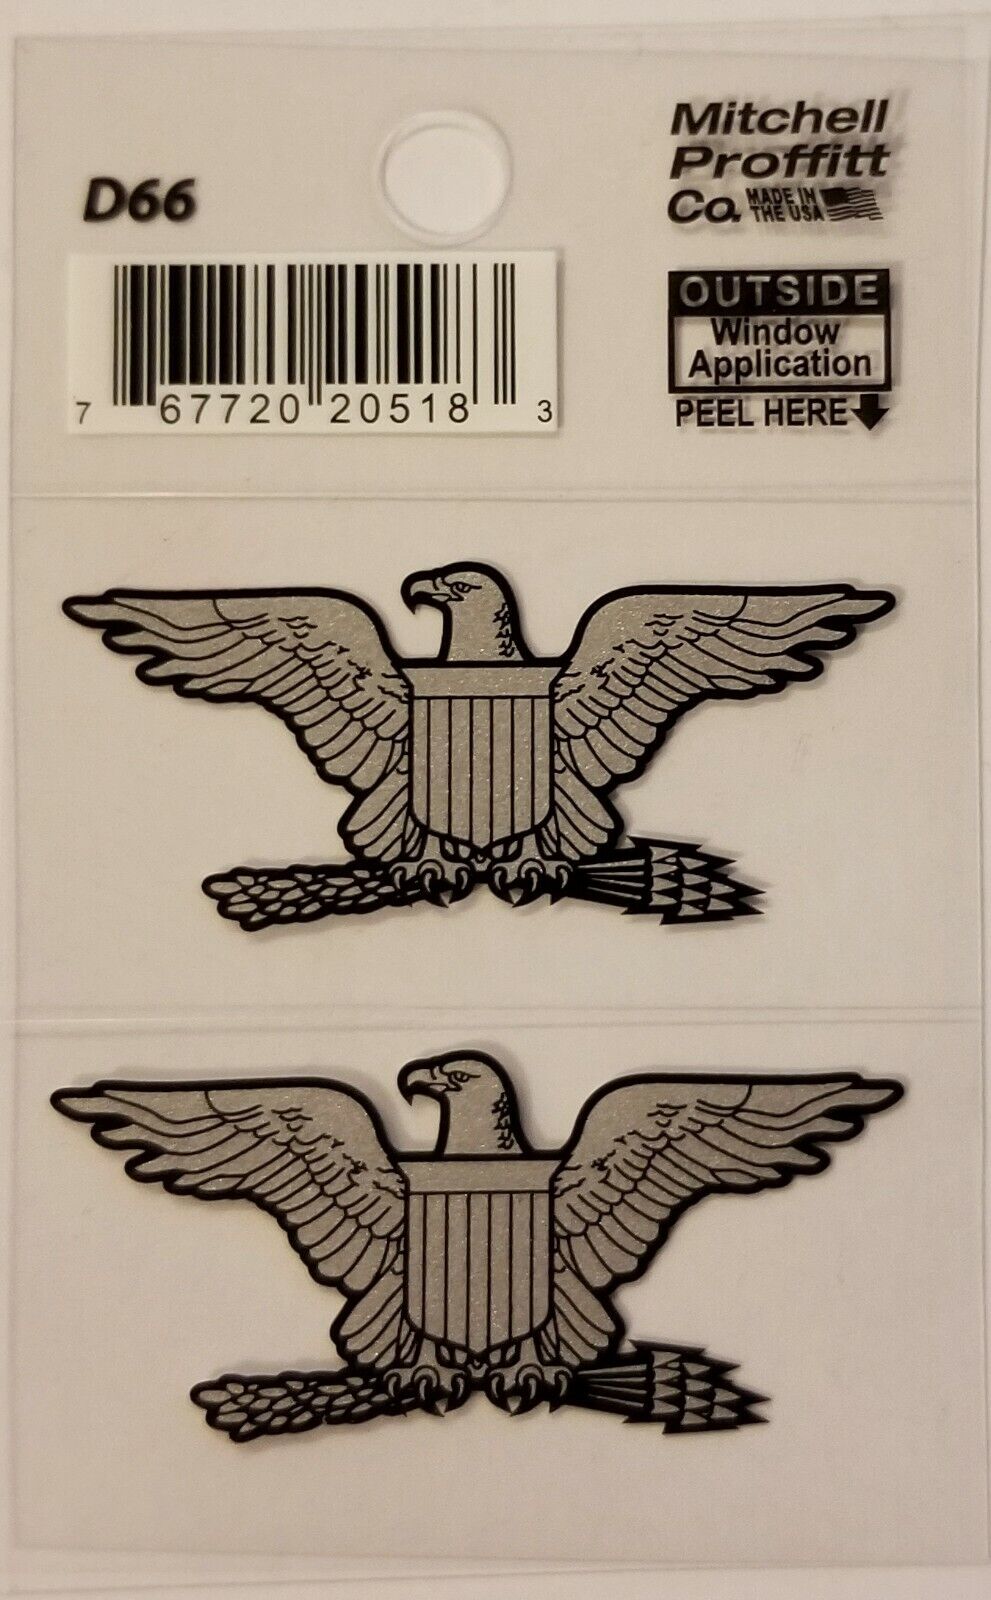 O-6 SILVER BIRD 2 ON ONE SHEET STICKER - DECAL - MADE IN THE USA